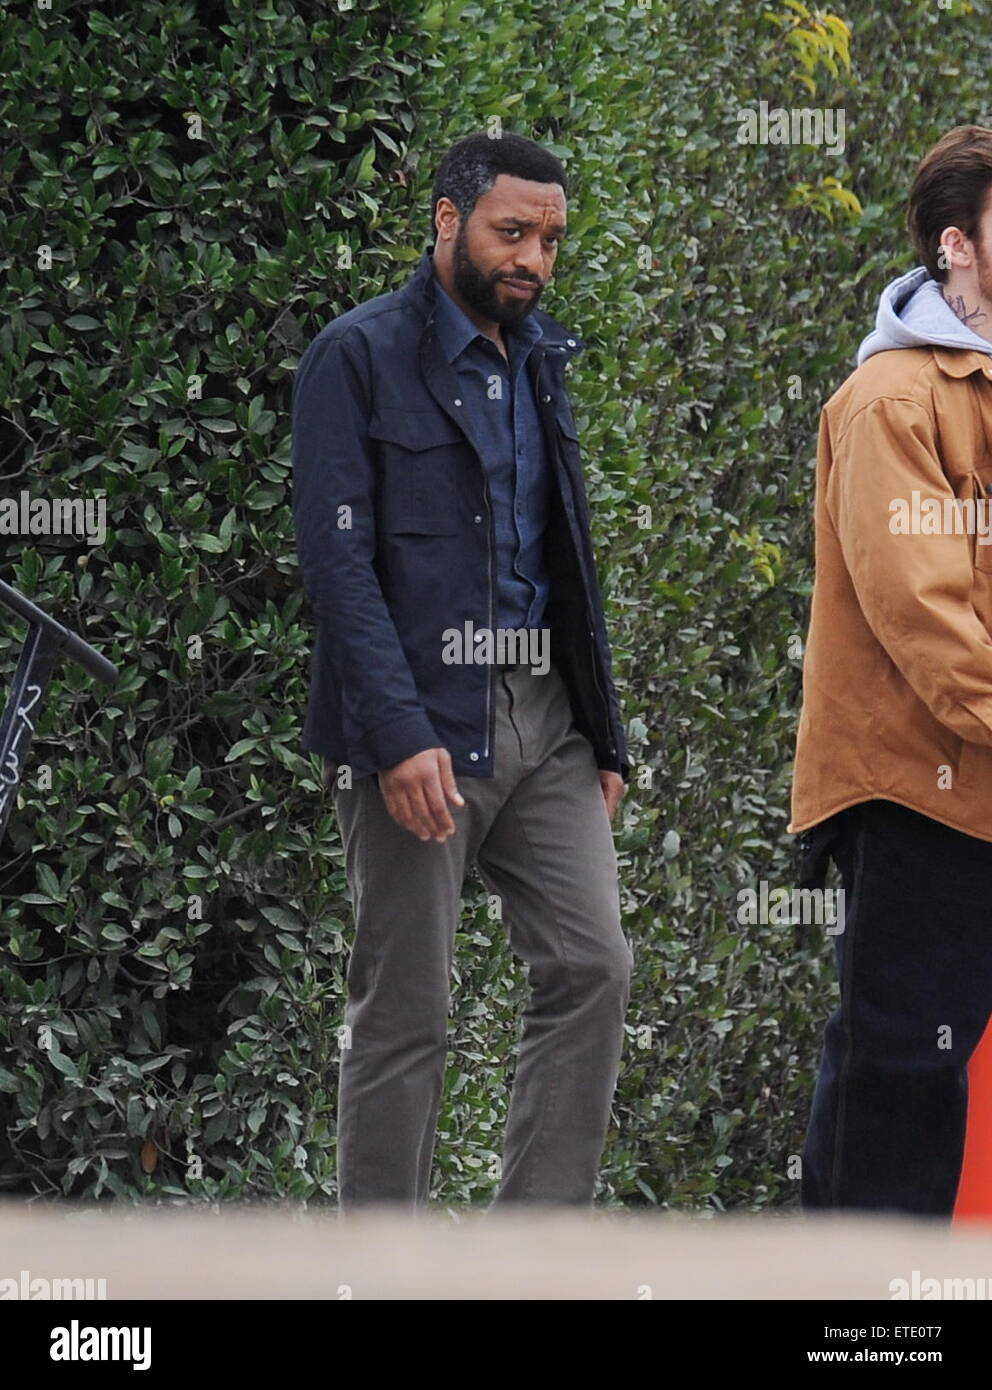 Oscar nominee '12 Years A Slave' star Chiwetel Ejiofor spotted on the set of 'The Secret In Their Eyes' filming in Pasadena Ca. The actor was joined by co star Dean Norris from 'Breaking Bad' and Daniel Moder as the cinematographer for the film. Daniel's famous wife Julia Roberts is also casted for the film.  Featuring: Chiwetel Ejiofor Where: Pasadena, California, United States When: 28 Jan 2015 Credit: Cousart/JFXimages/WENN.com Stock Photo